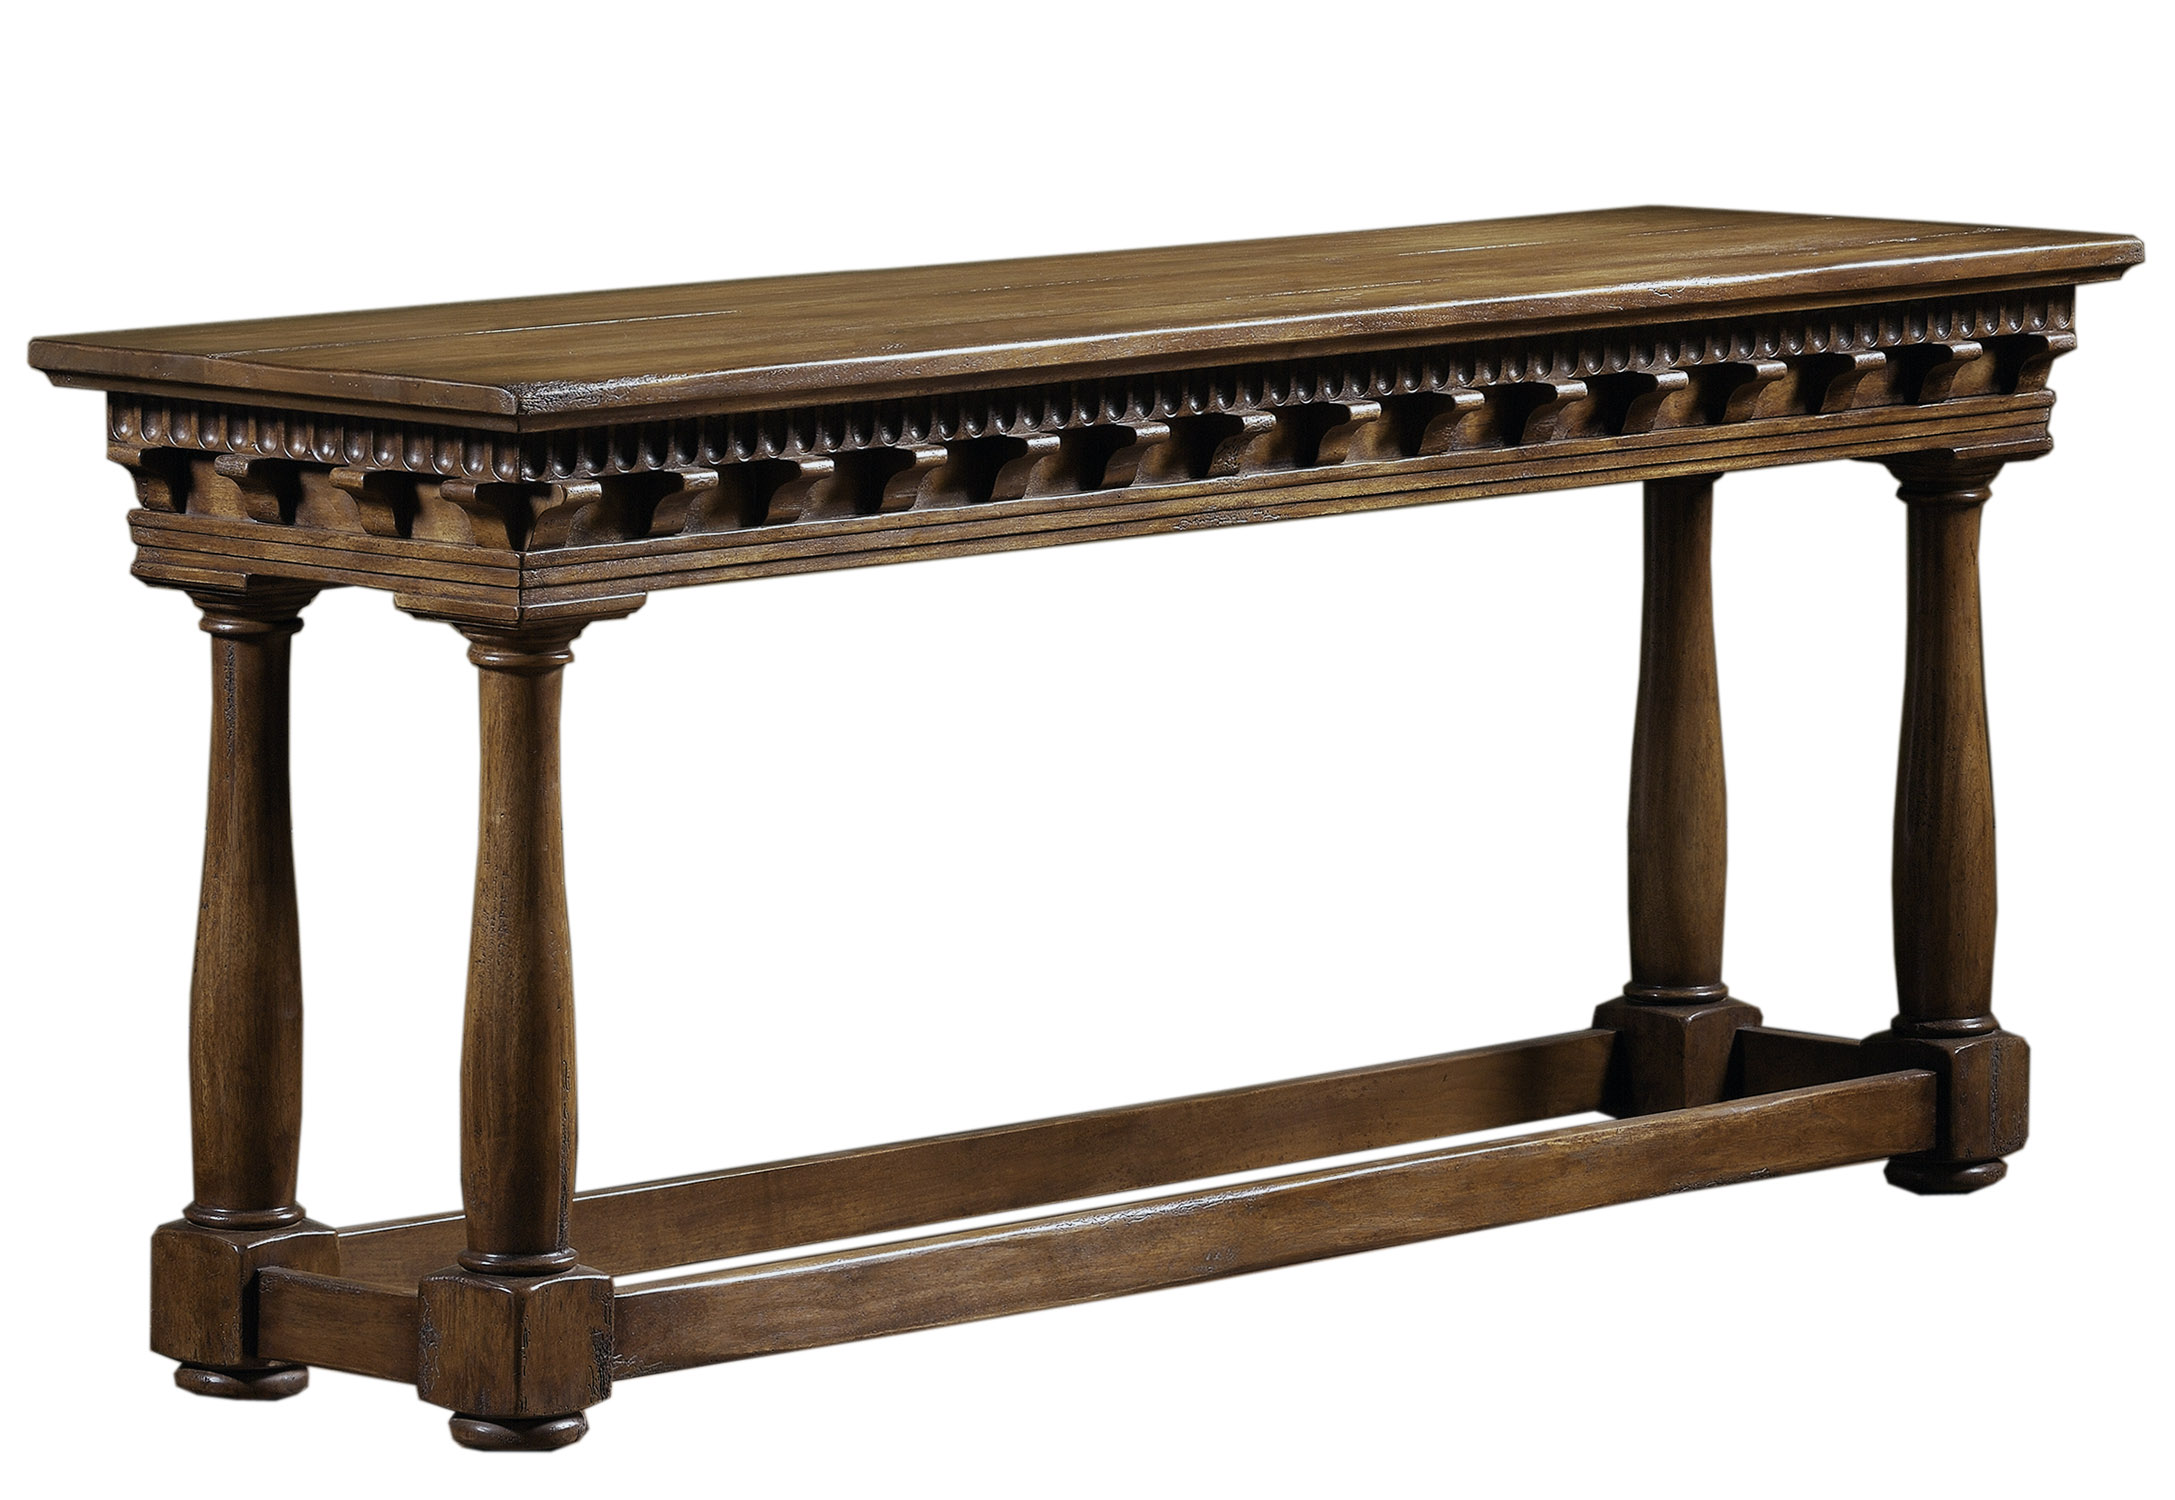 Floria traditional console sofa table with decorative carved apron by Woodland Furniture in Idaho Falls